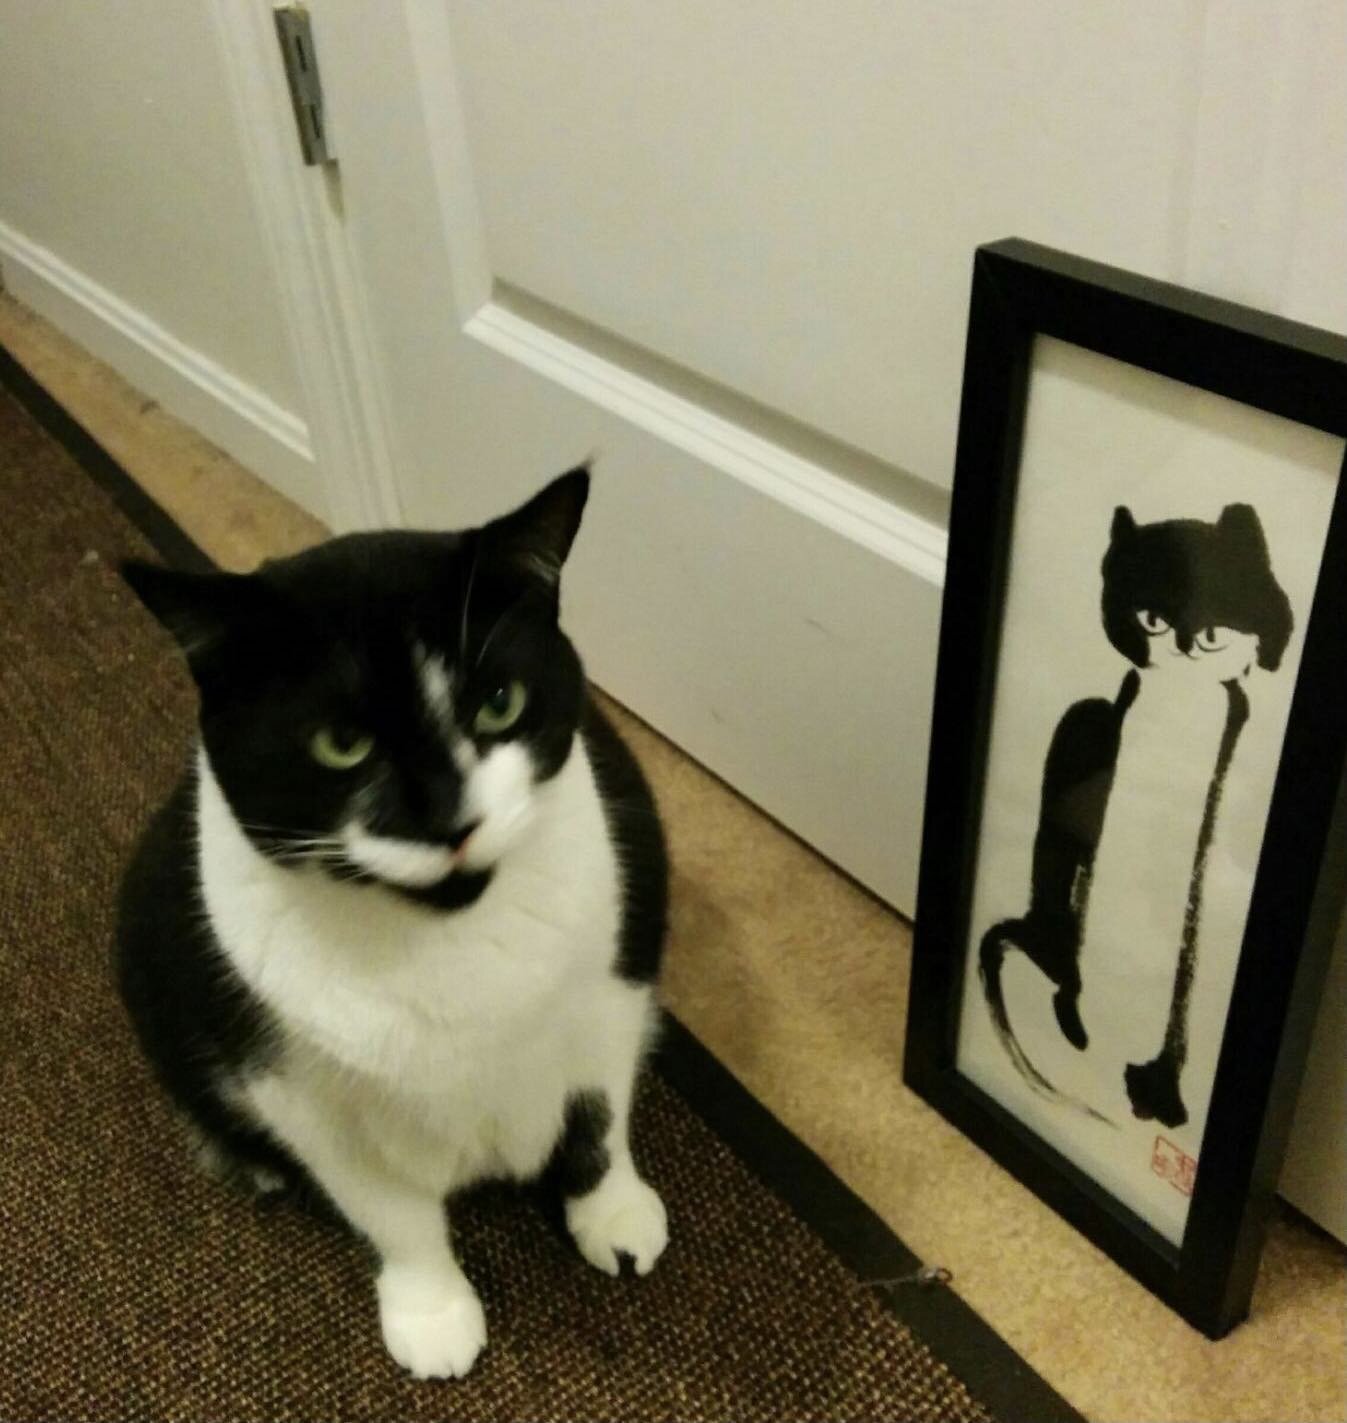 The cat &ldquo;Pepper&rdquo; finally approved my painting of him.  Years ago, a man came into my open studio and brought this Sumie painting of a cat, just now by surprise, I got the photo.  It made my day!

Don&rsquo;t you love surprise?  Can you sh